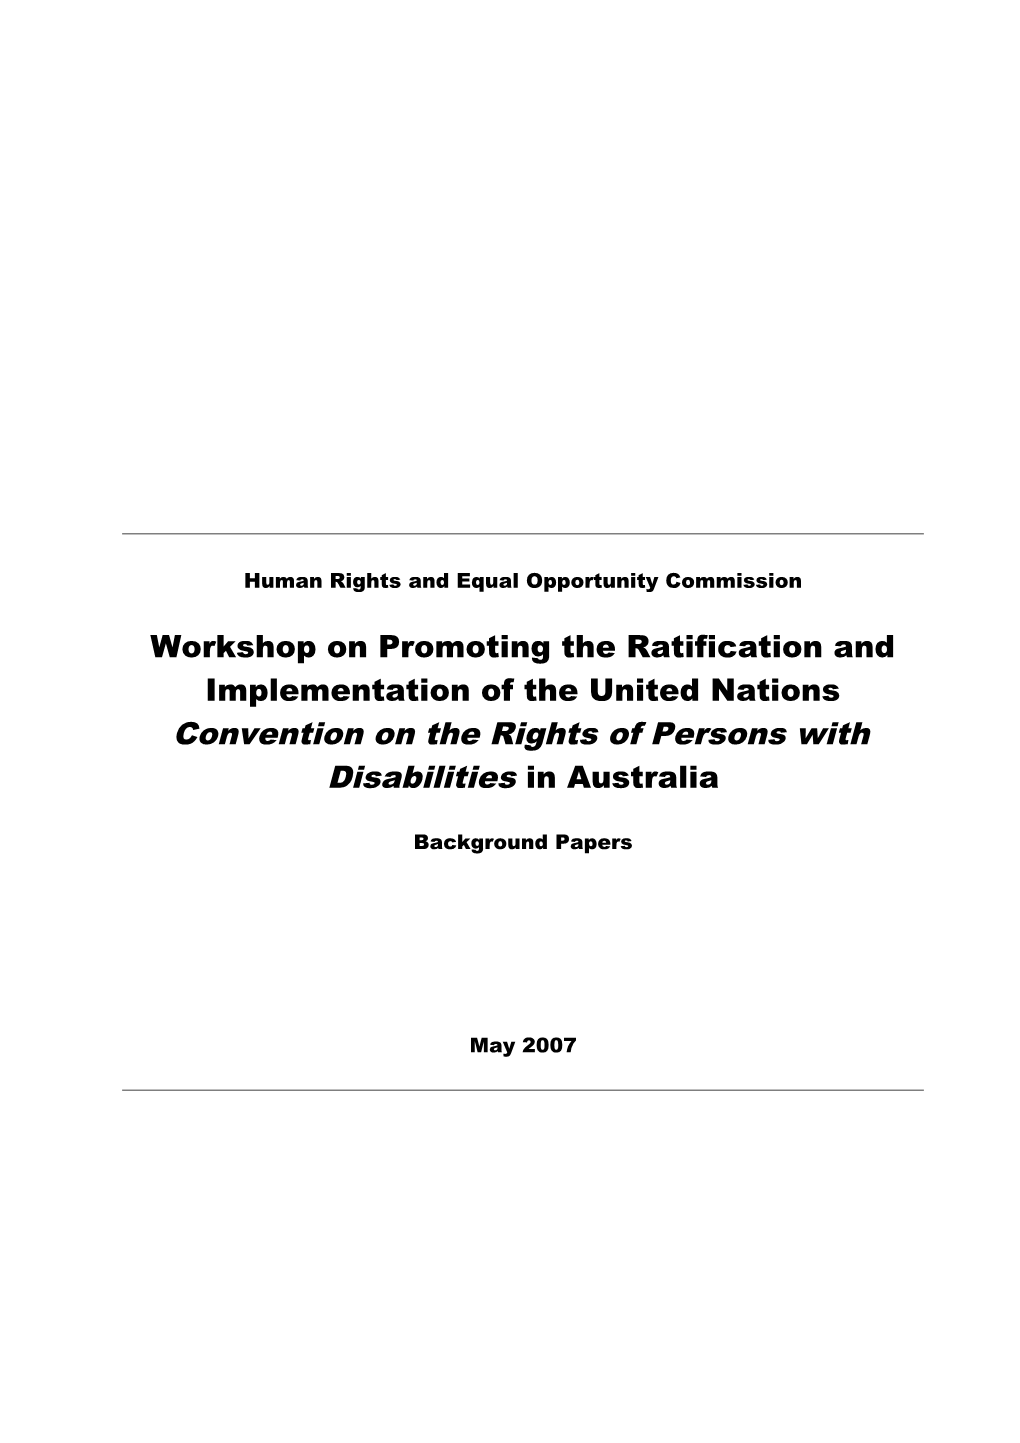 Human Rights and Equal Opportunity Commission s1